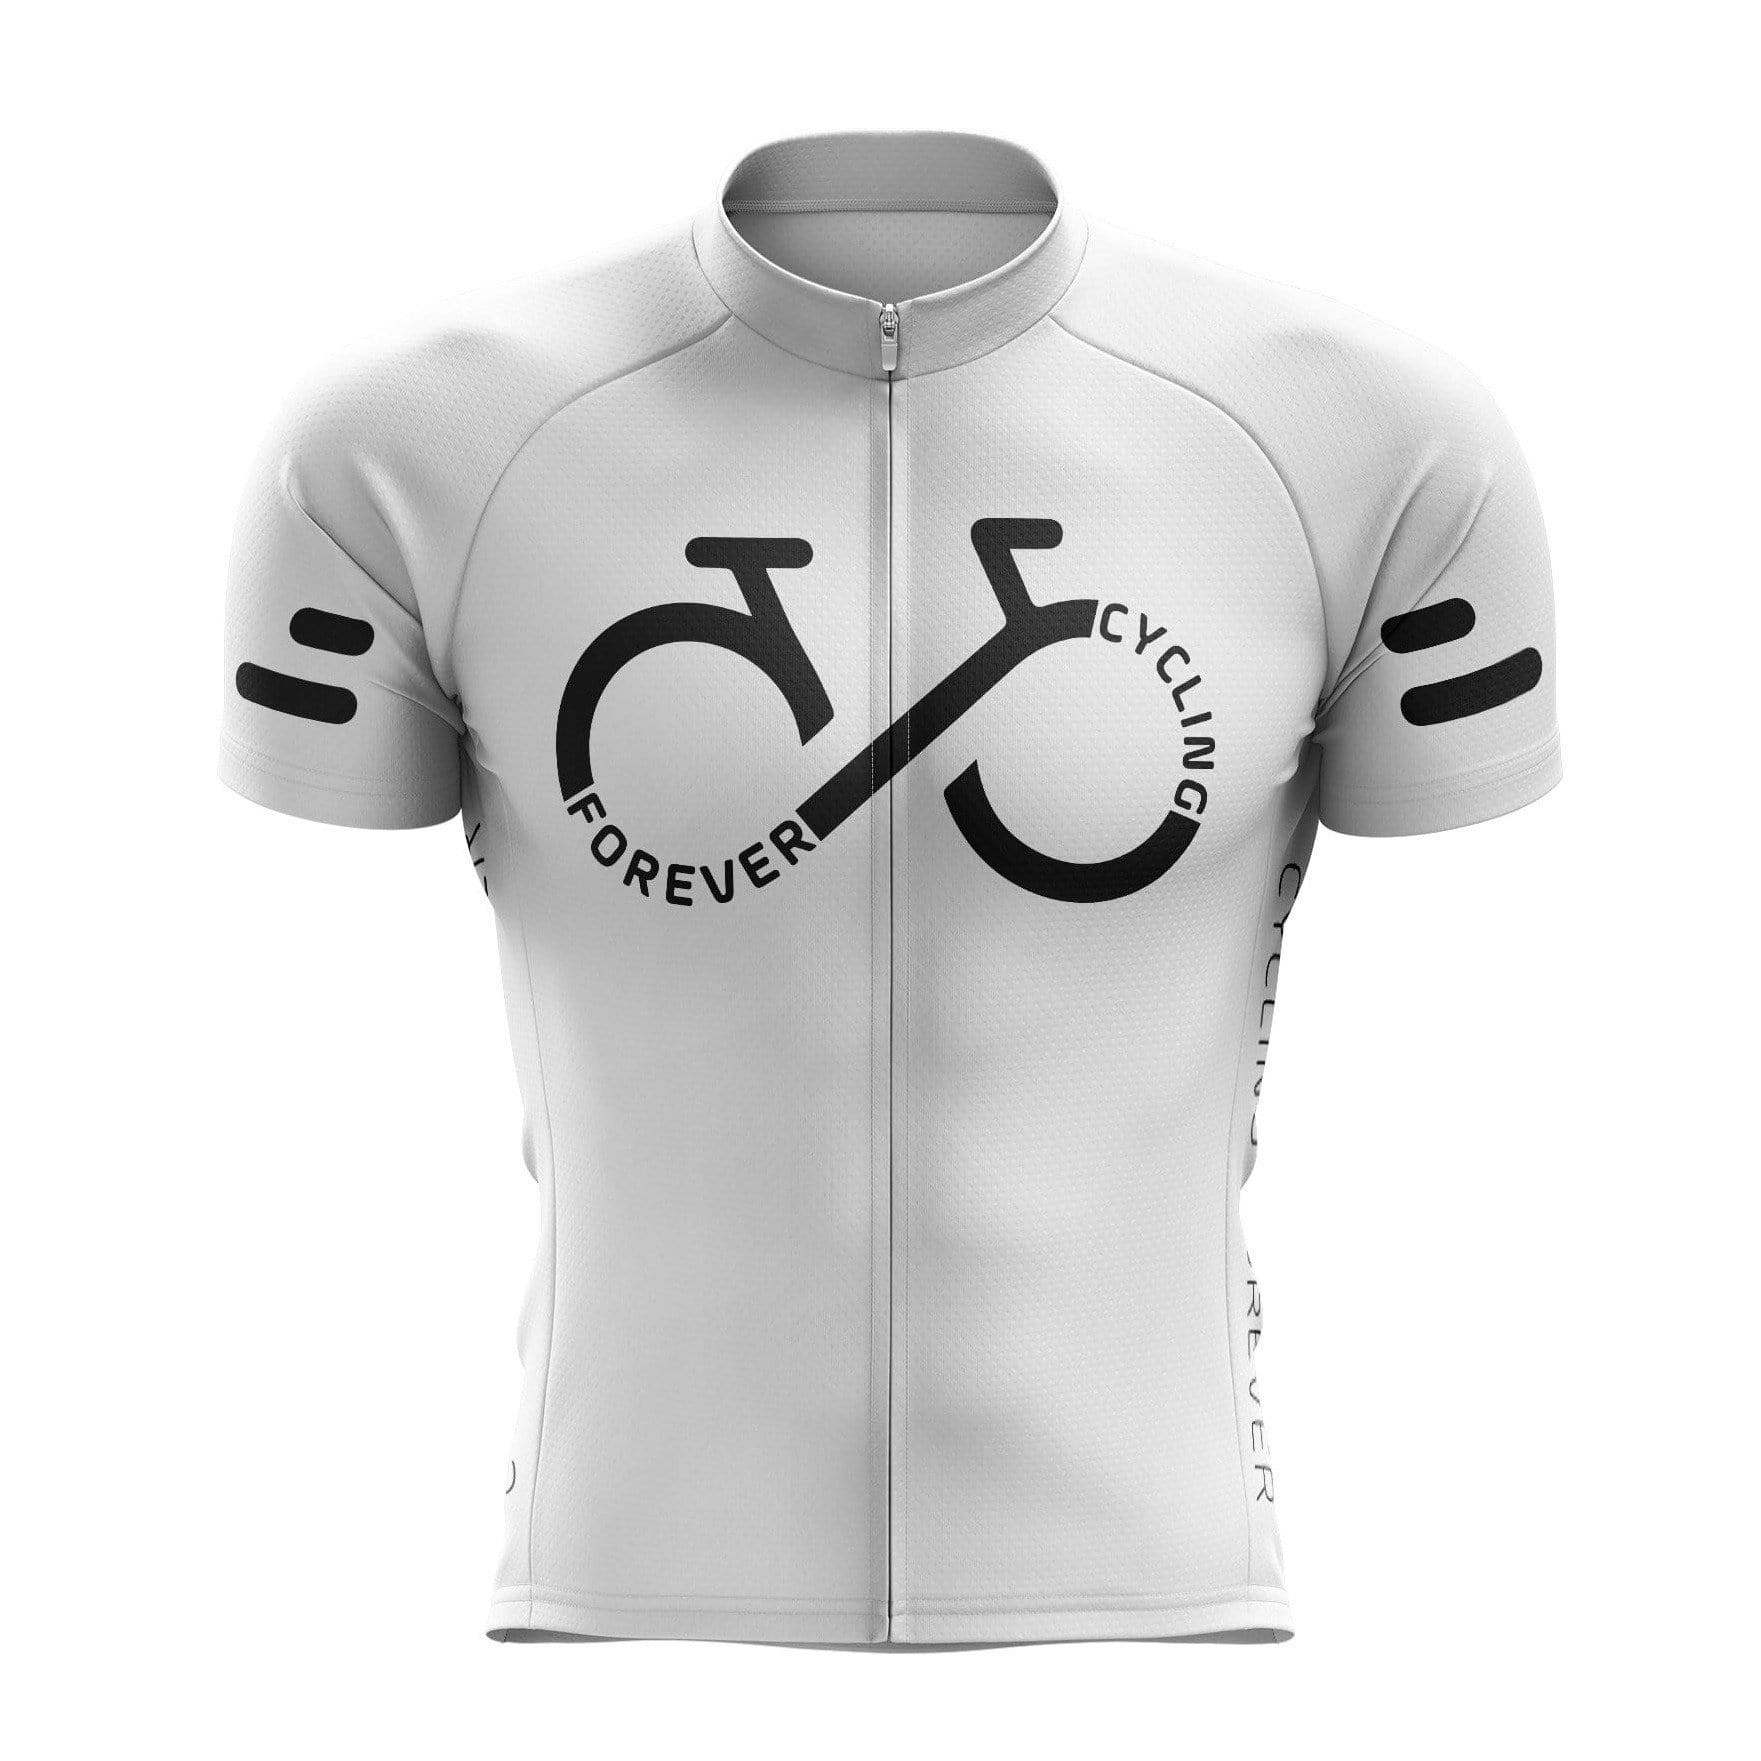 Mens Cycling Jersey Short Sleeve White